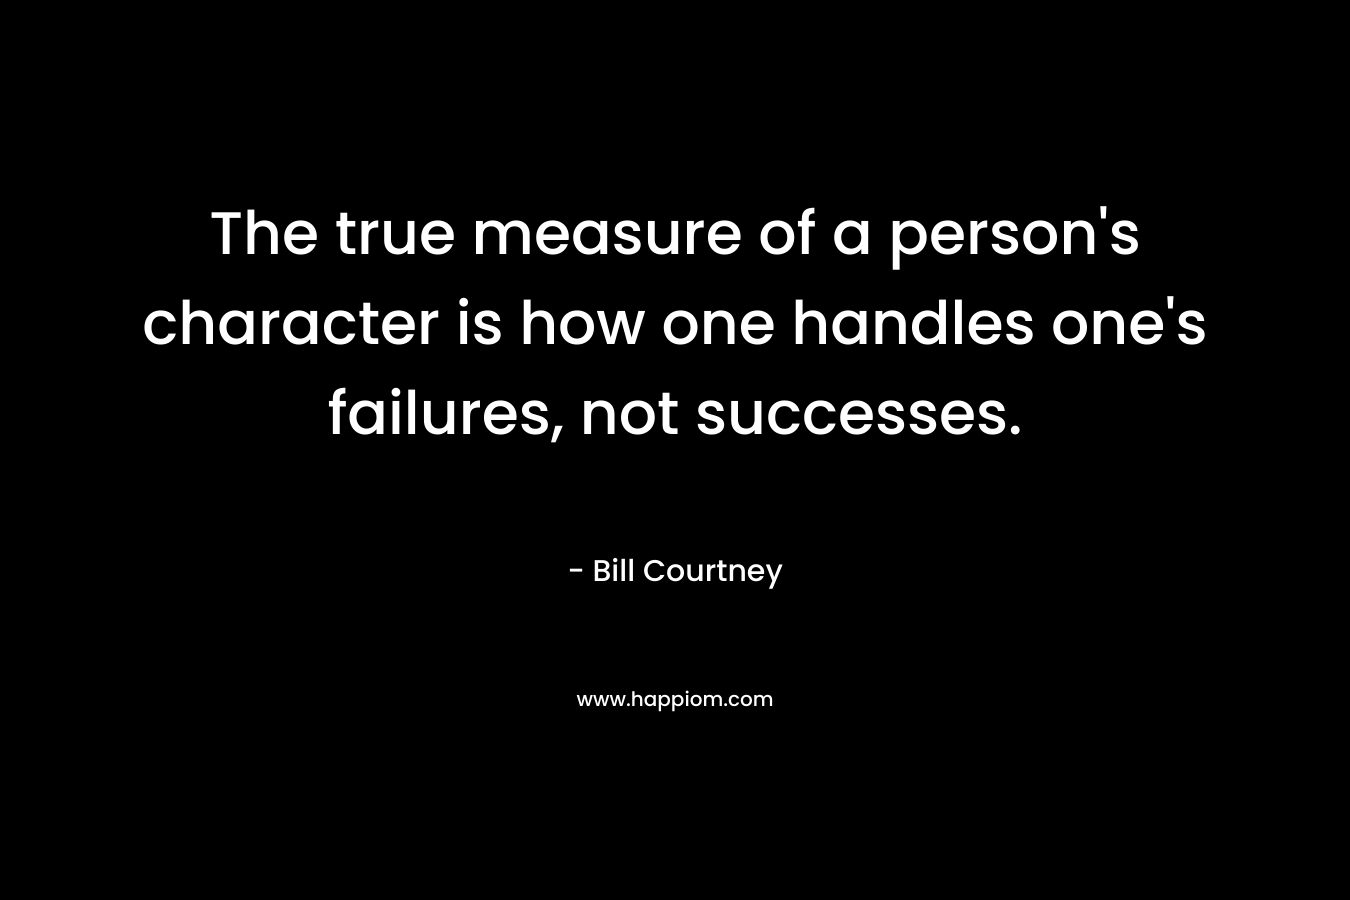 The true measure of a person's character is how one handles one's failures, not successes.